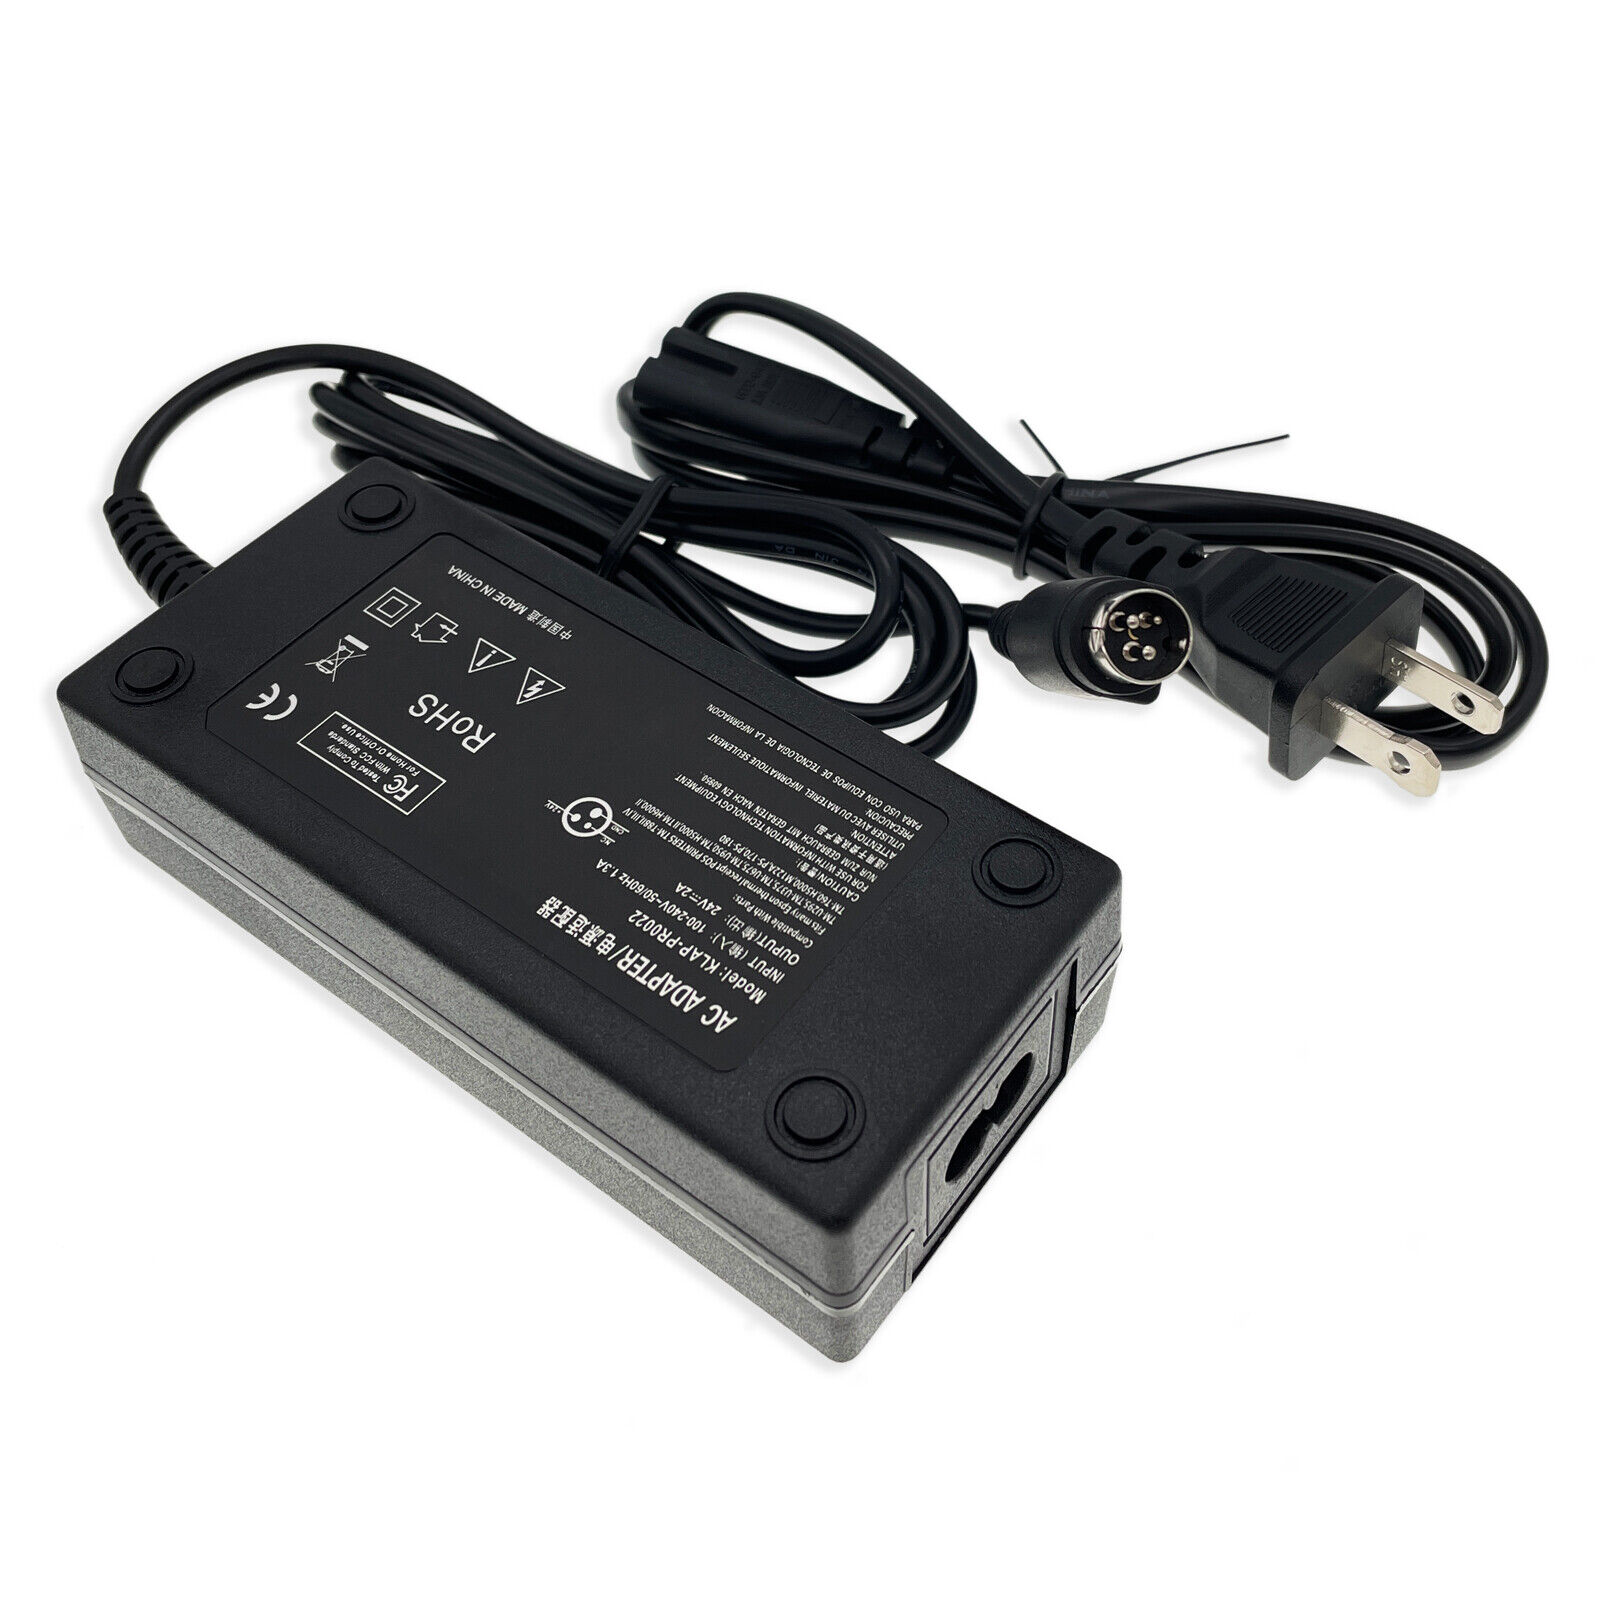 *Brand NEW*Epson TM88 M122 M147A M147B M147C Printer 2A 24V DC AC Adapter Power Supply Charger